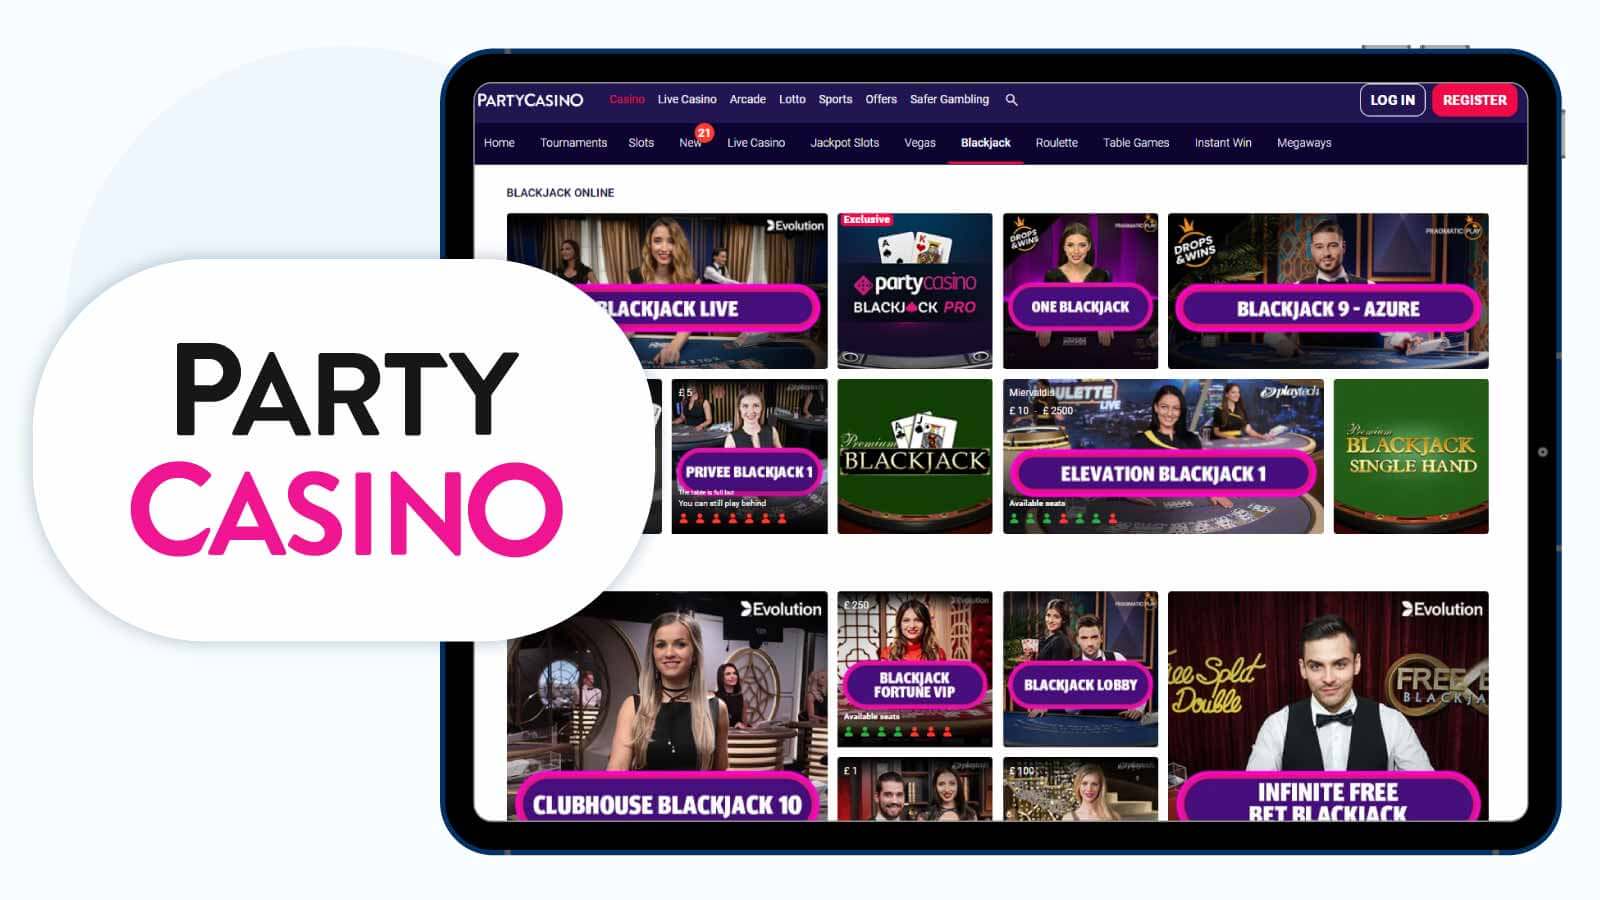 Party Casino Best Blackjack Casino Site for High-Rollers